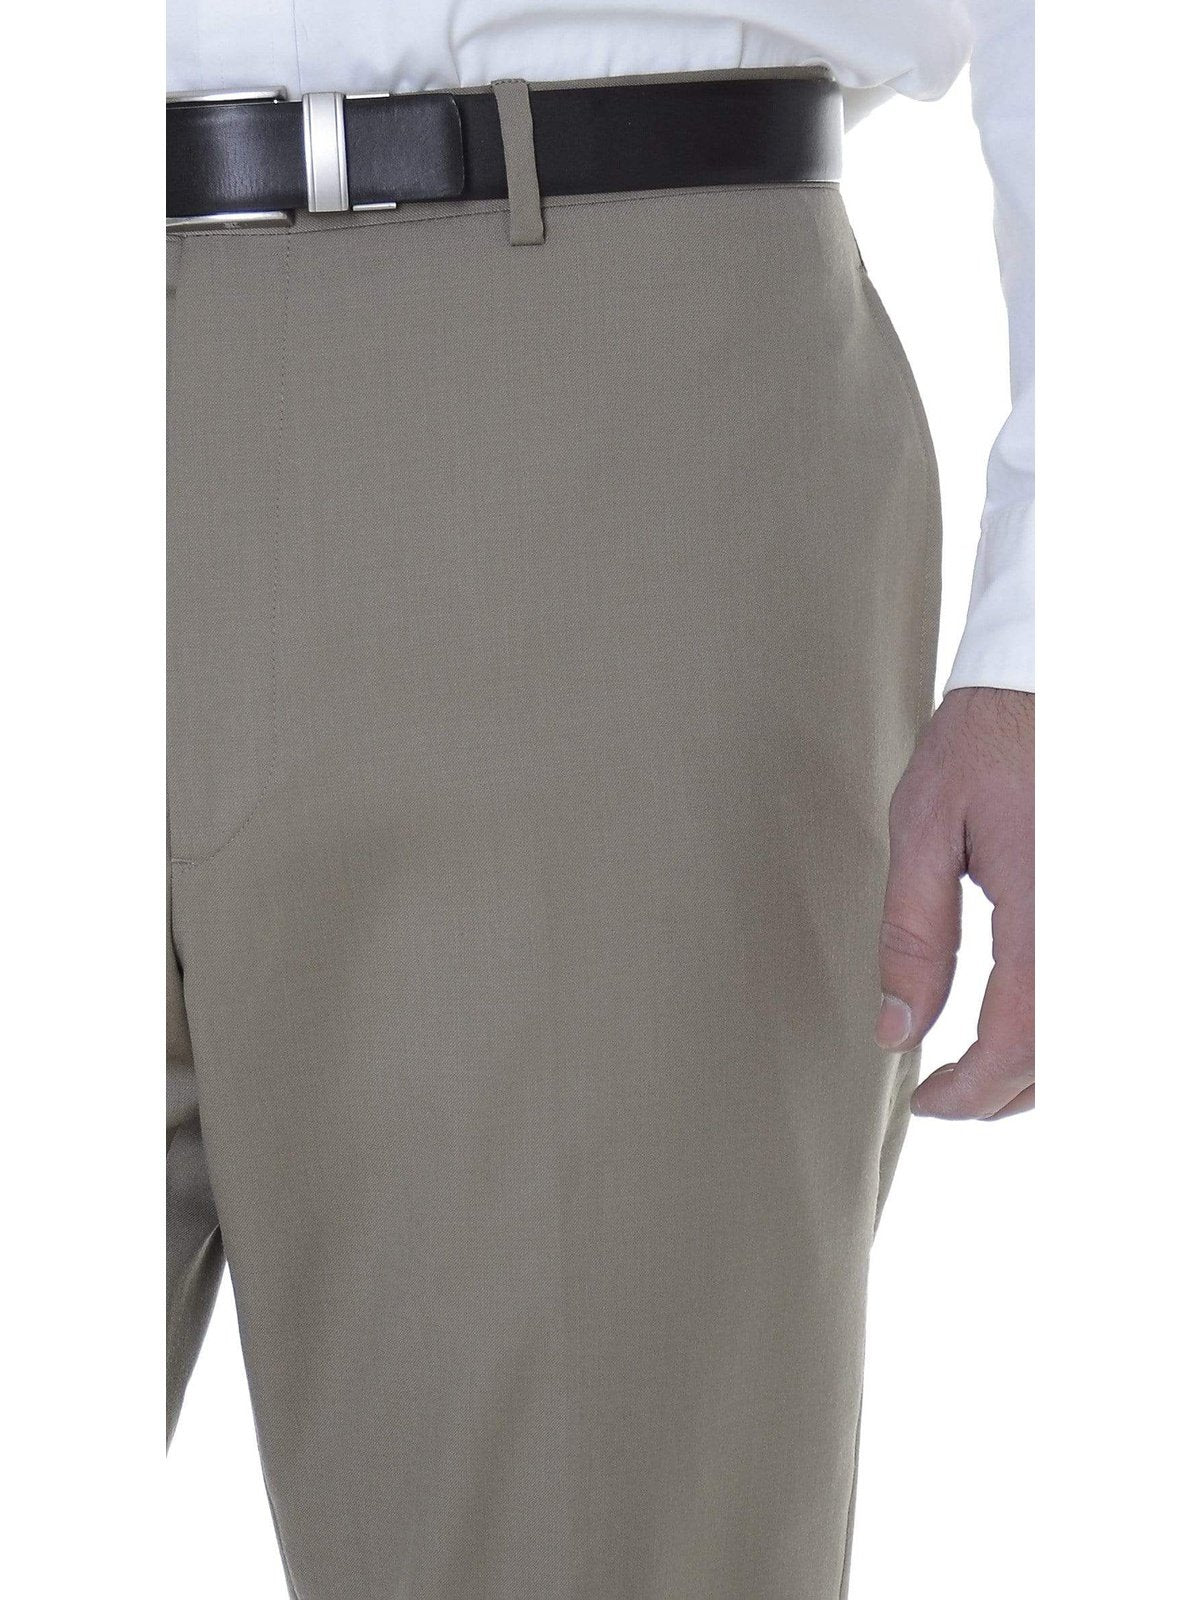 Tommy Hilfiger Trim Fit Solid Khaki Tan Flat Front Worsted Wool Dress Pants